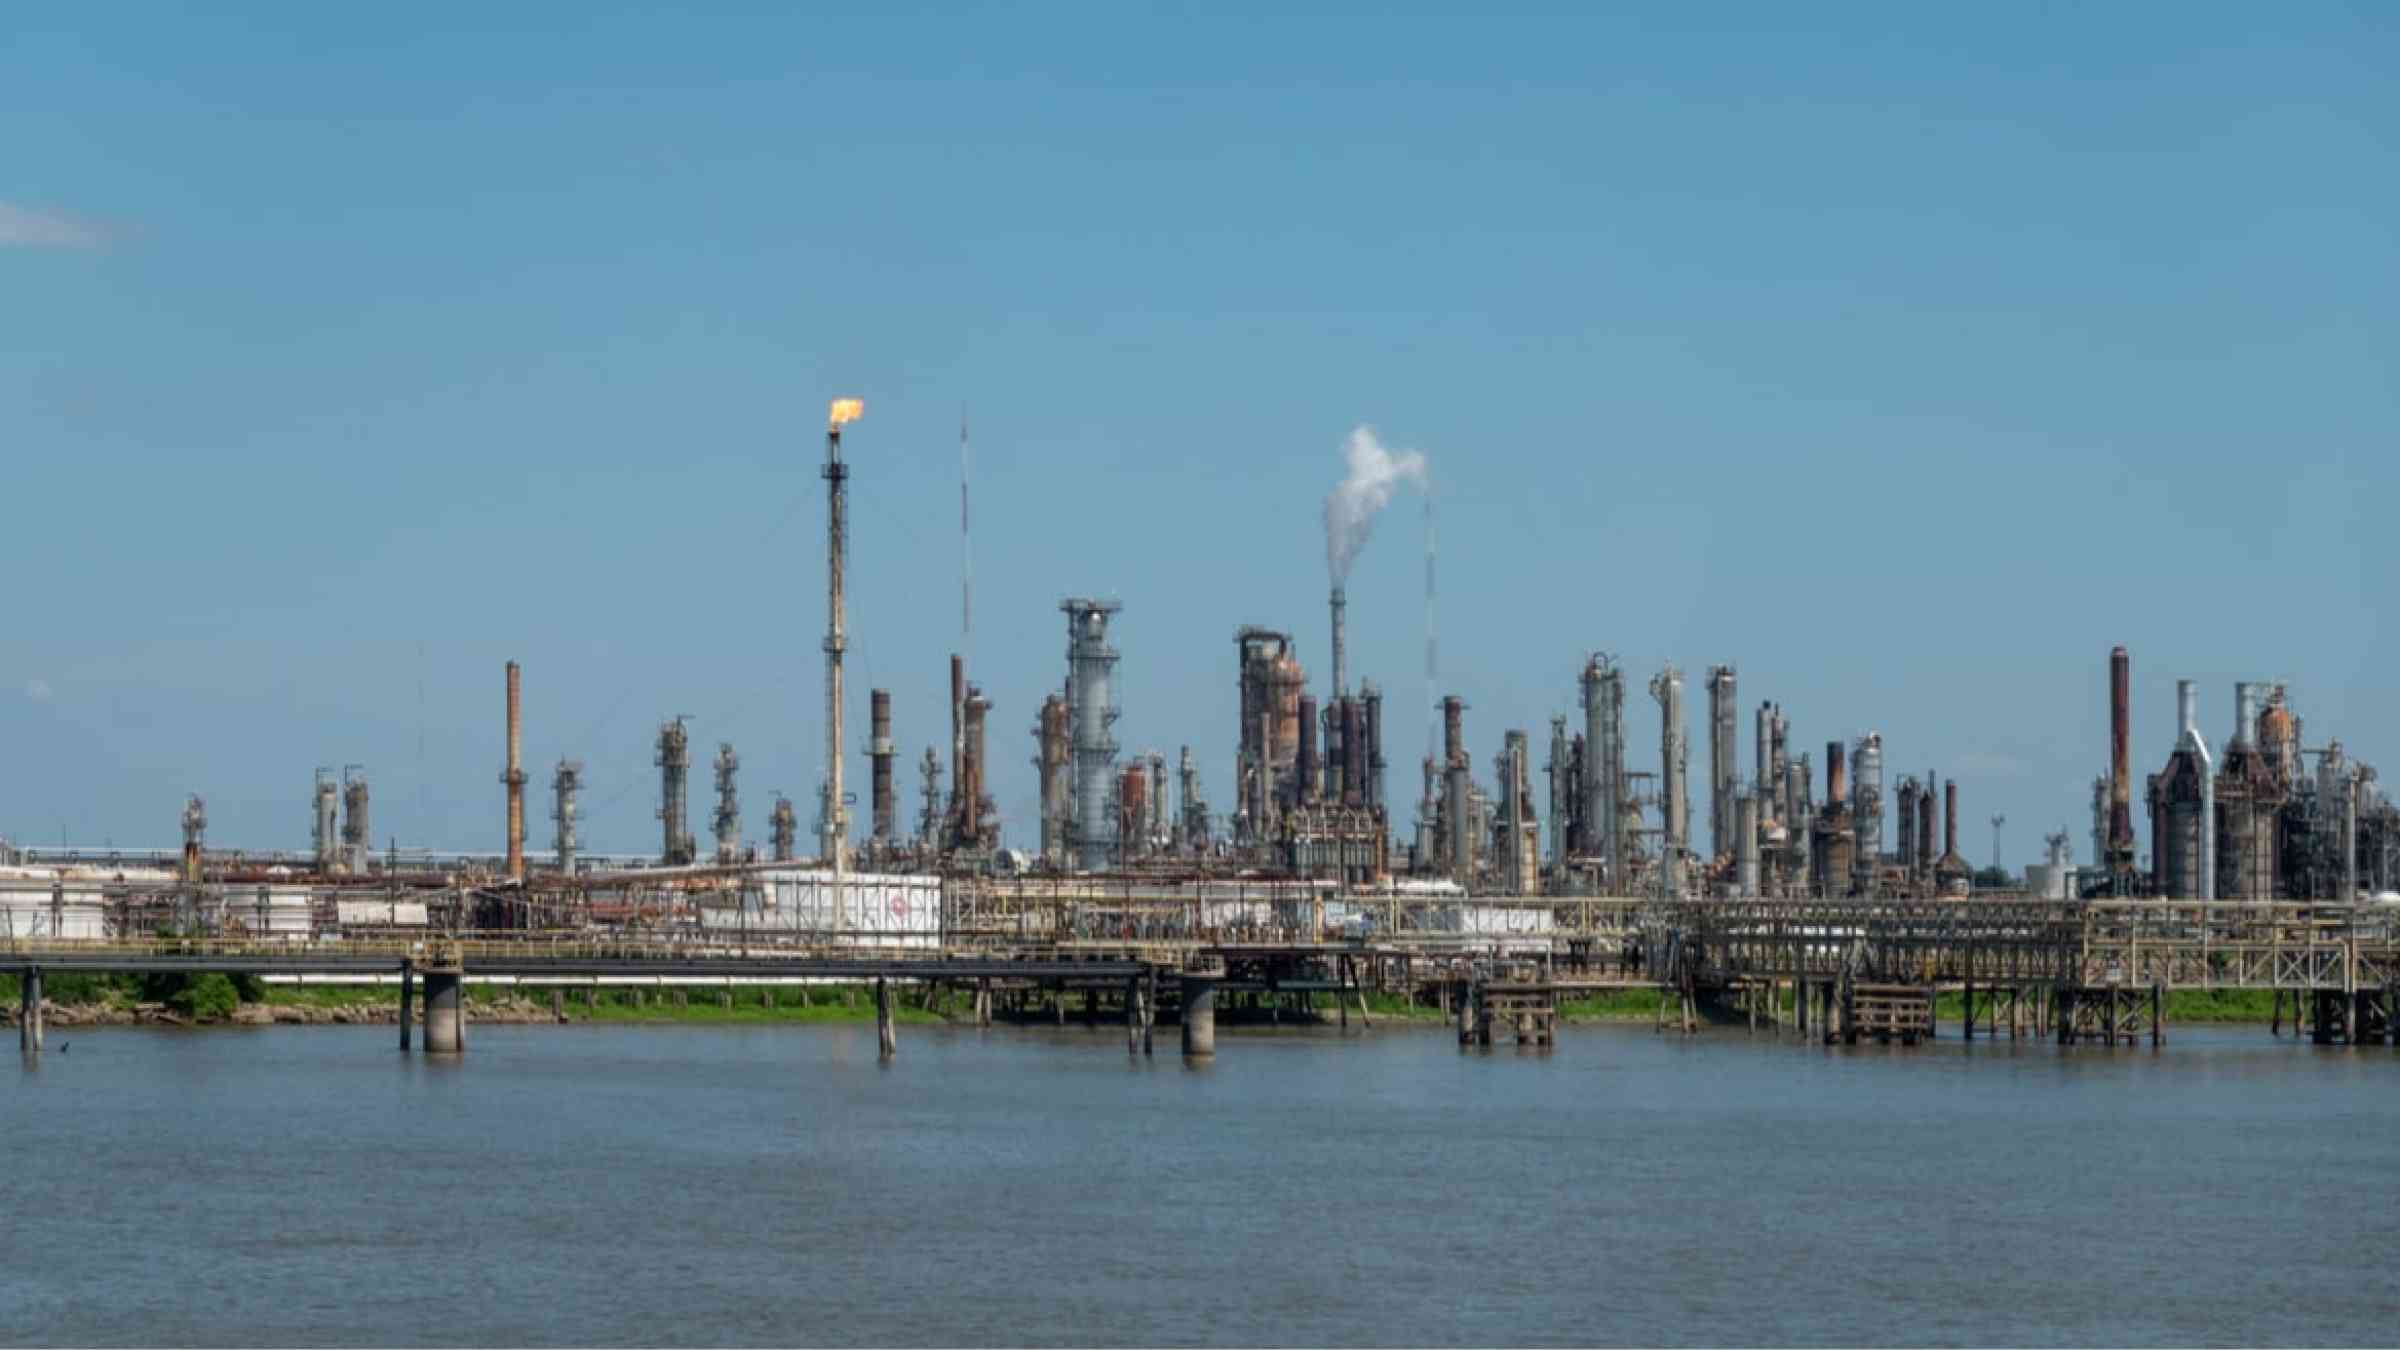 Oil refinery as seen from a river, USA.